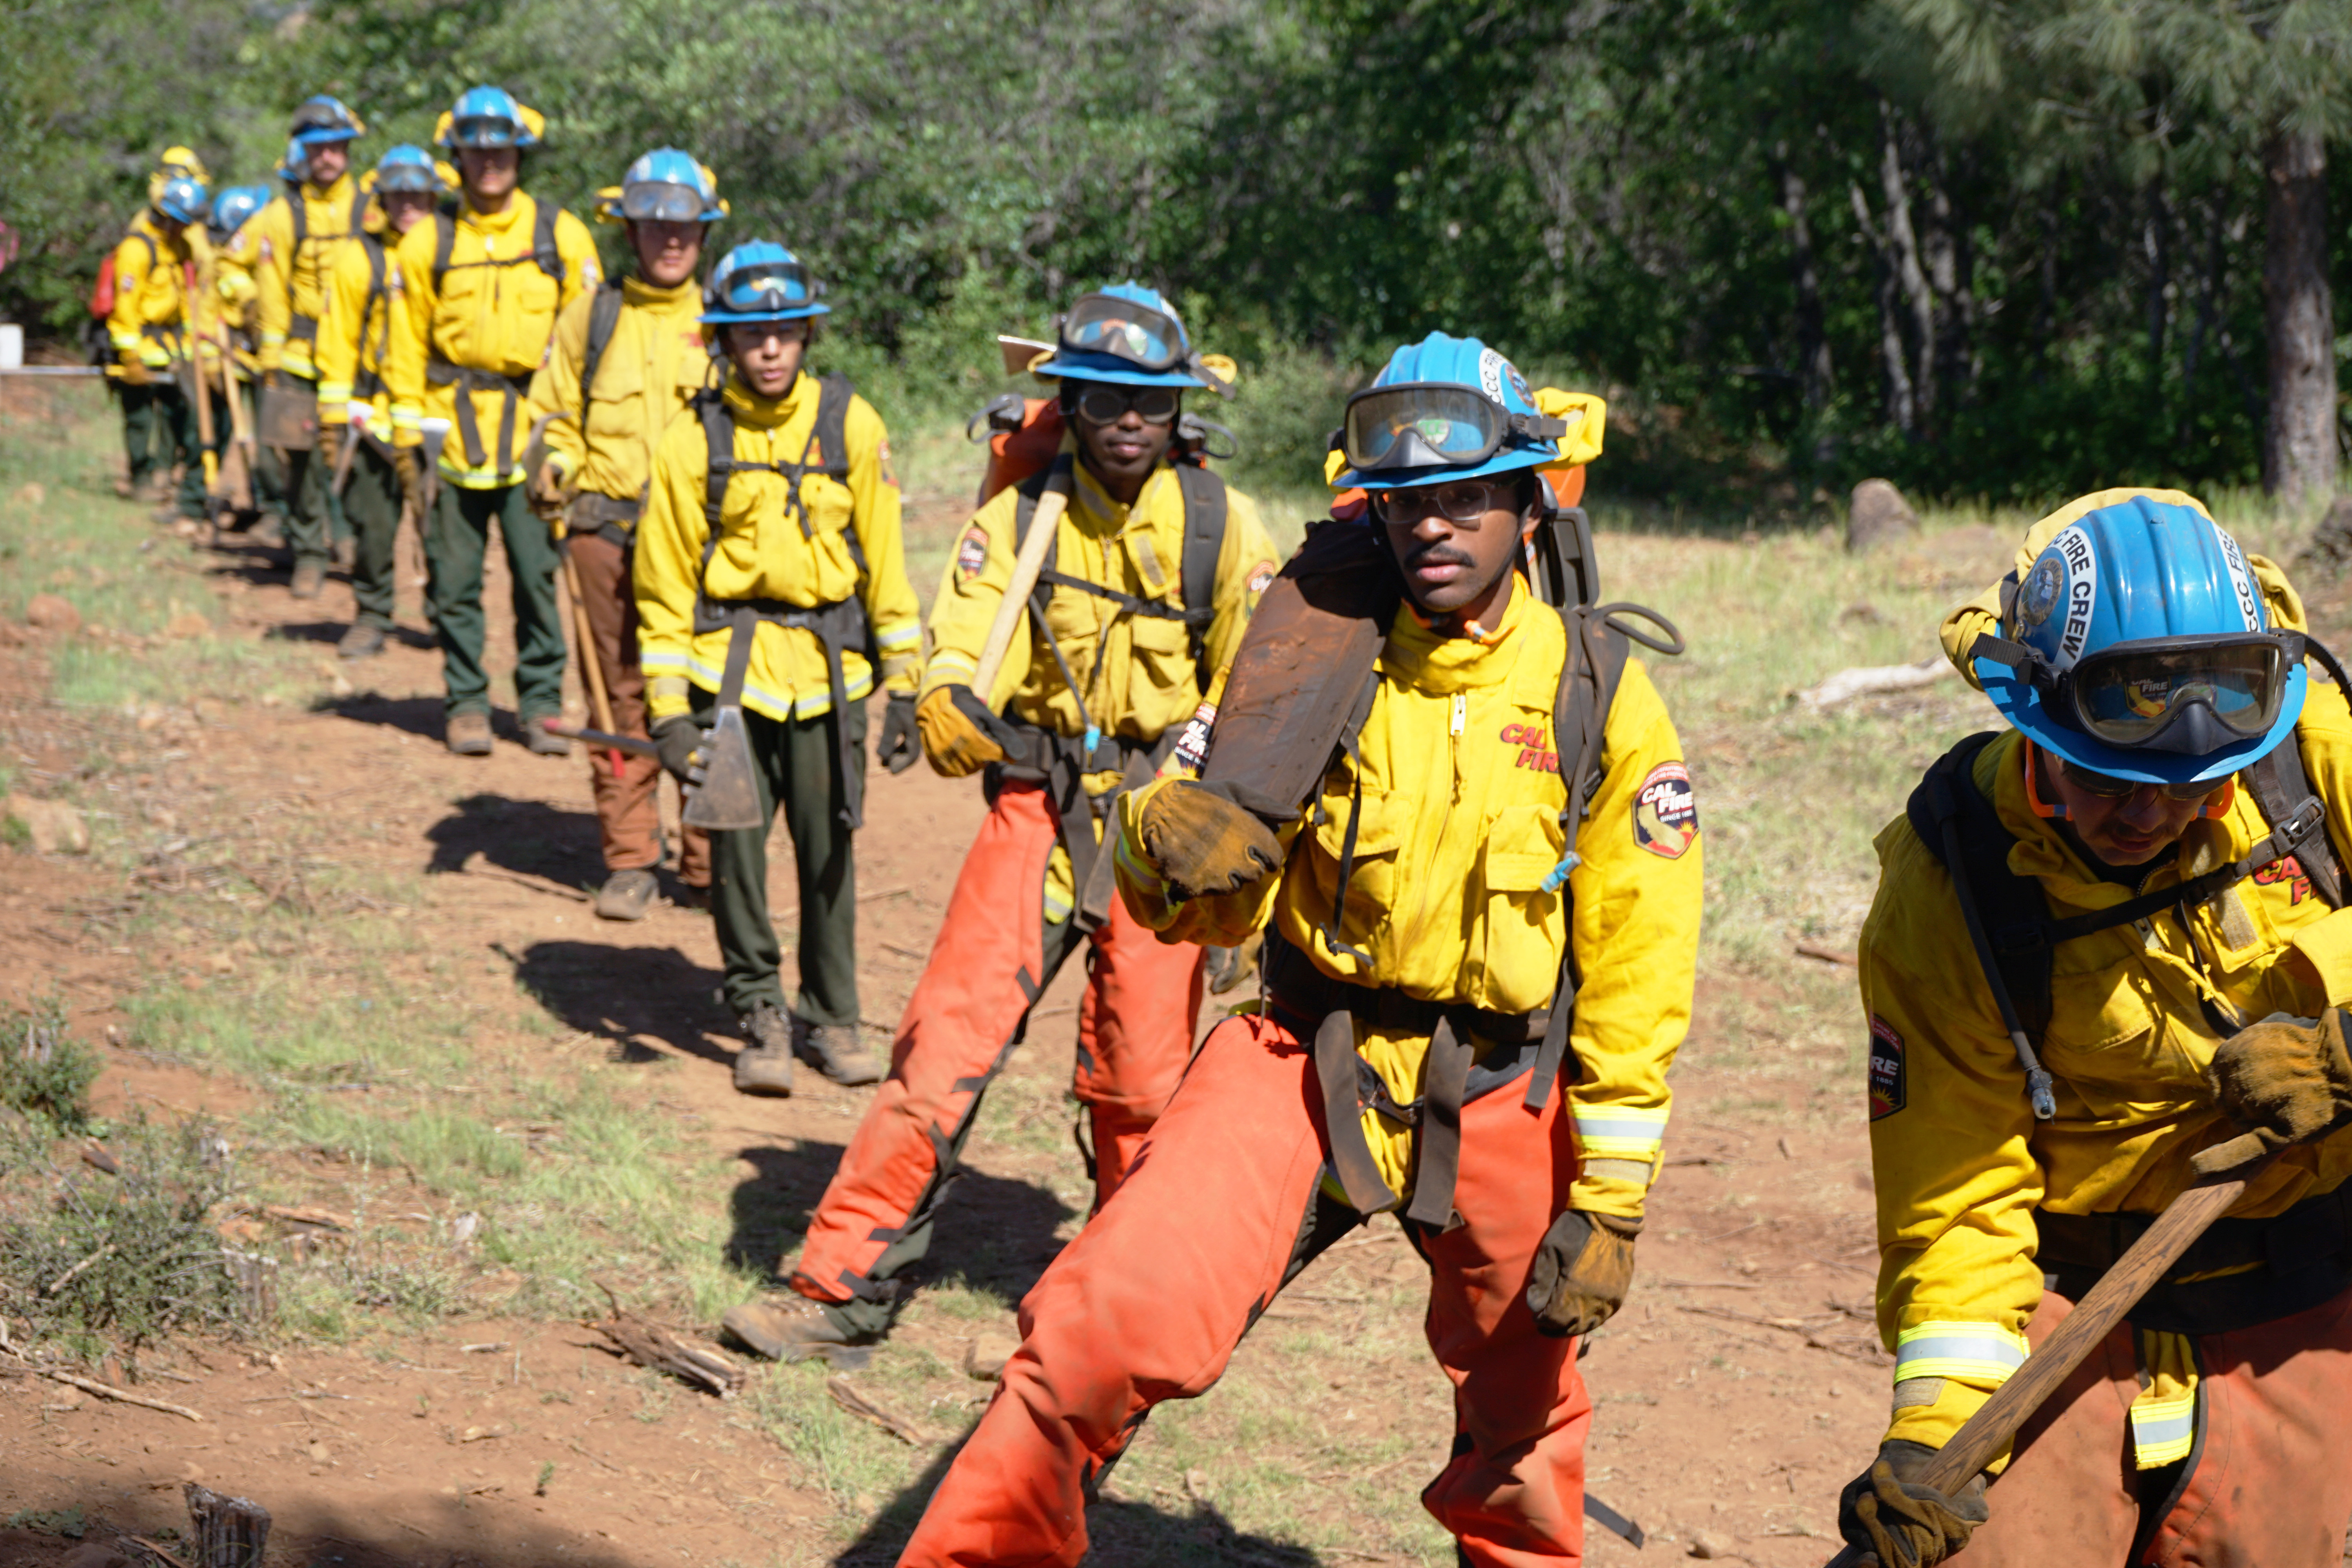 Wildland firefighters in full safety gear hold hand tools and wait for instructions